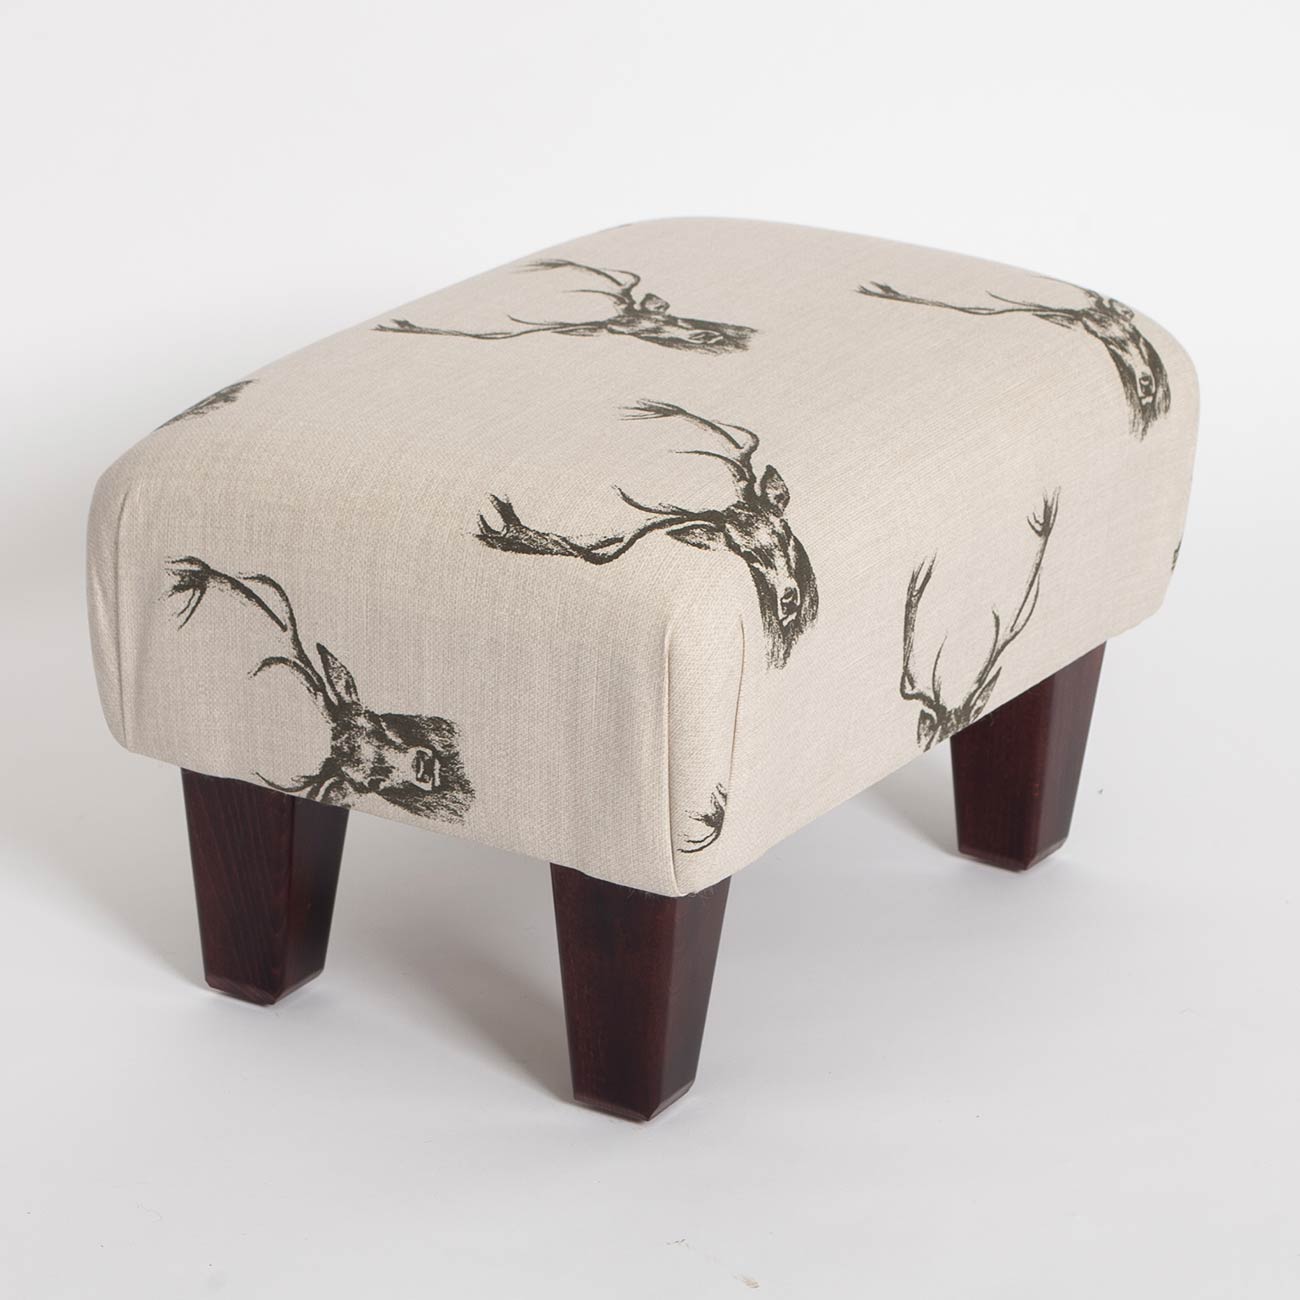 stag-head-footstool3 fabric from JLP